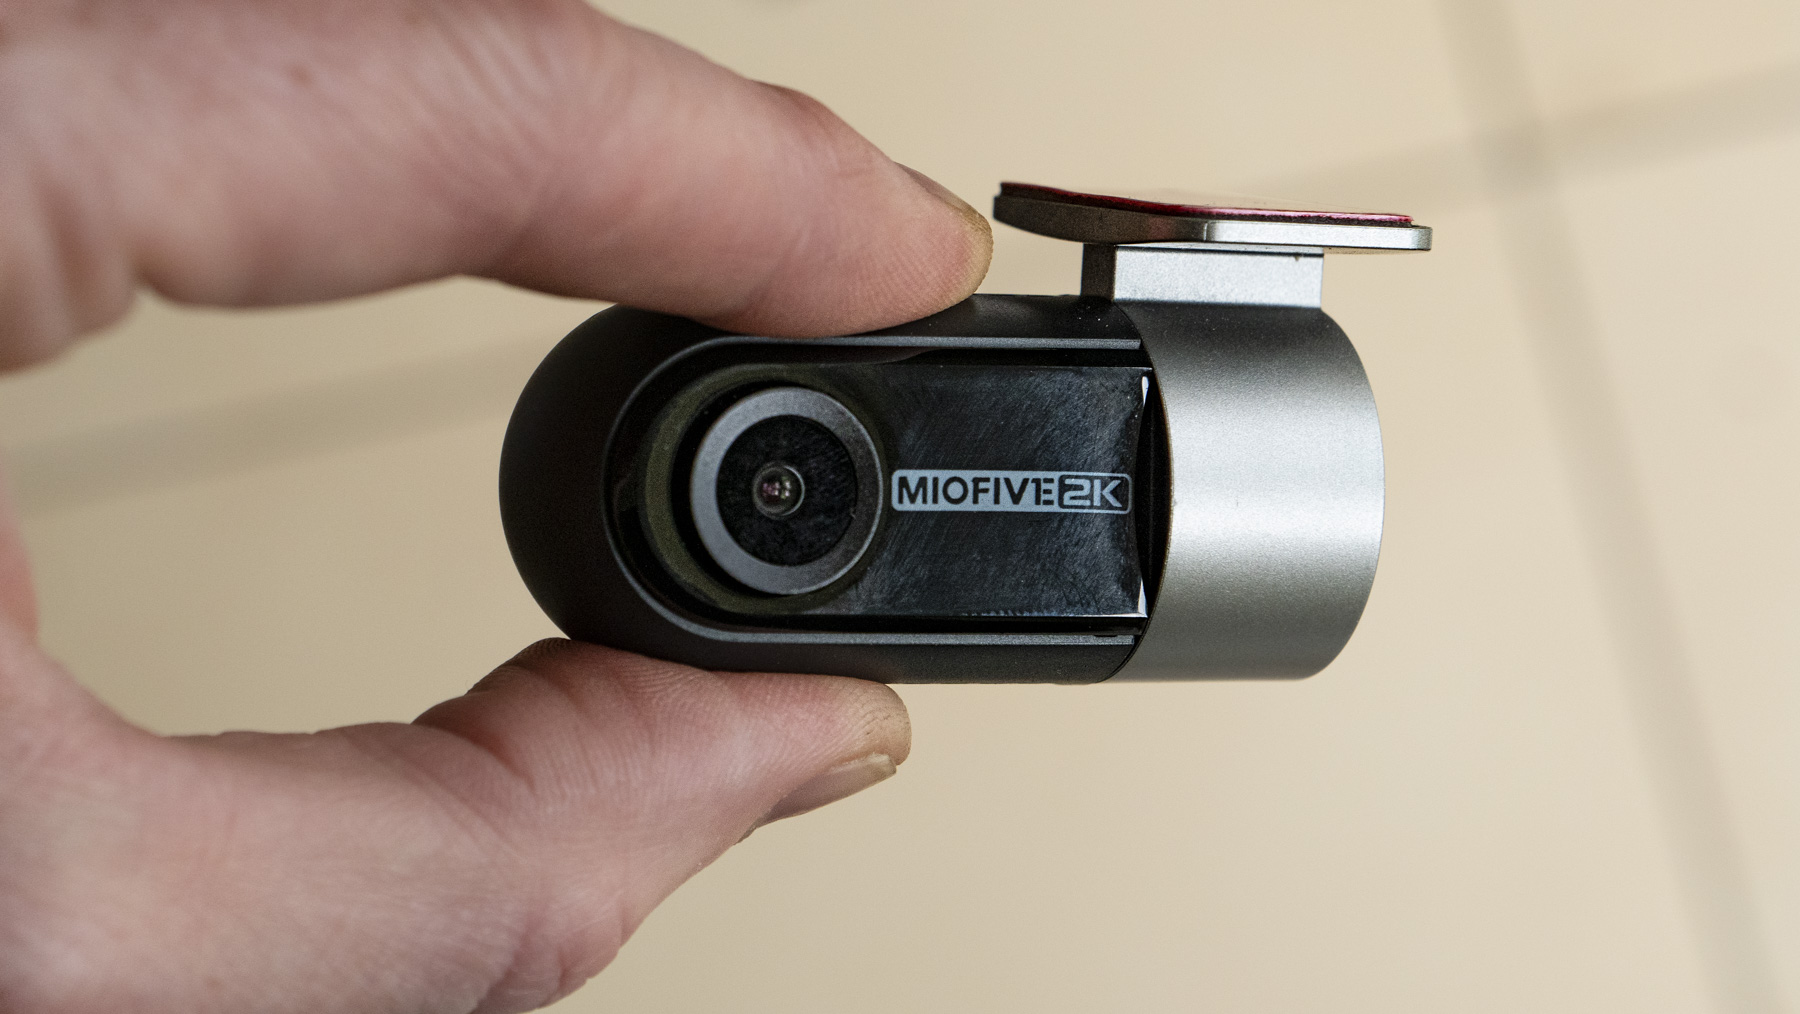 Miofive Dual Dash Cam tiny rear camera in the hand